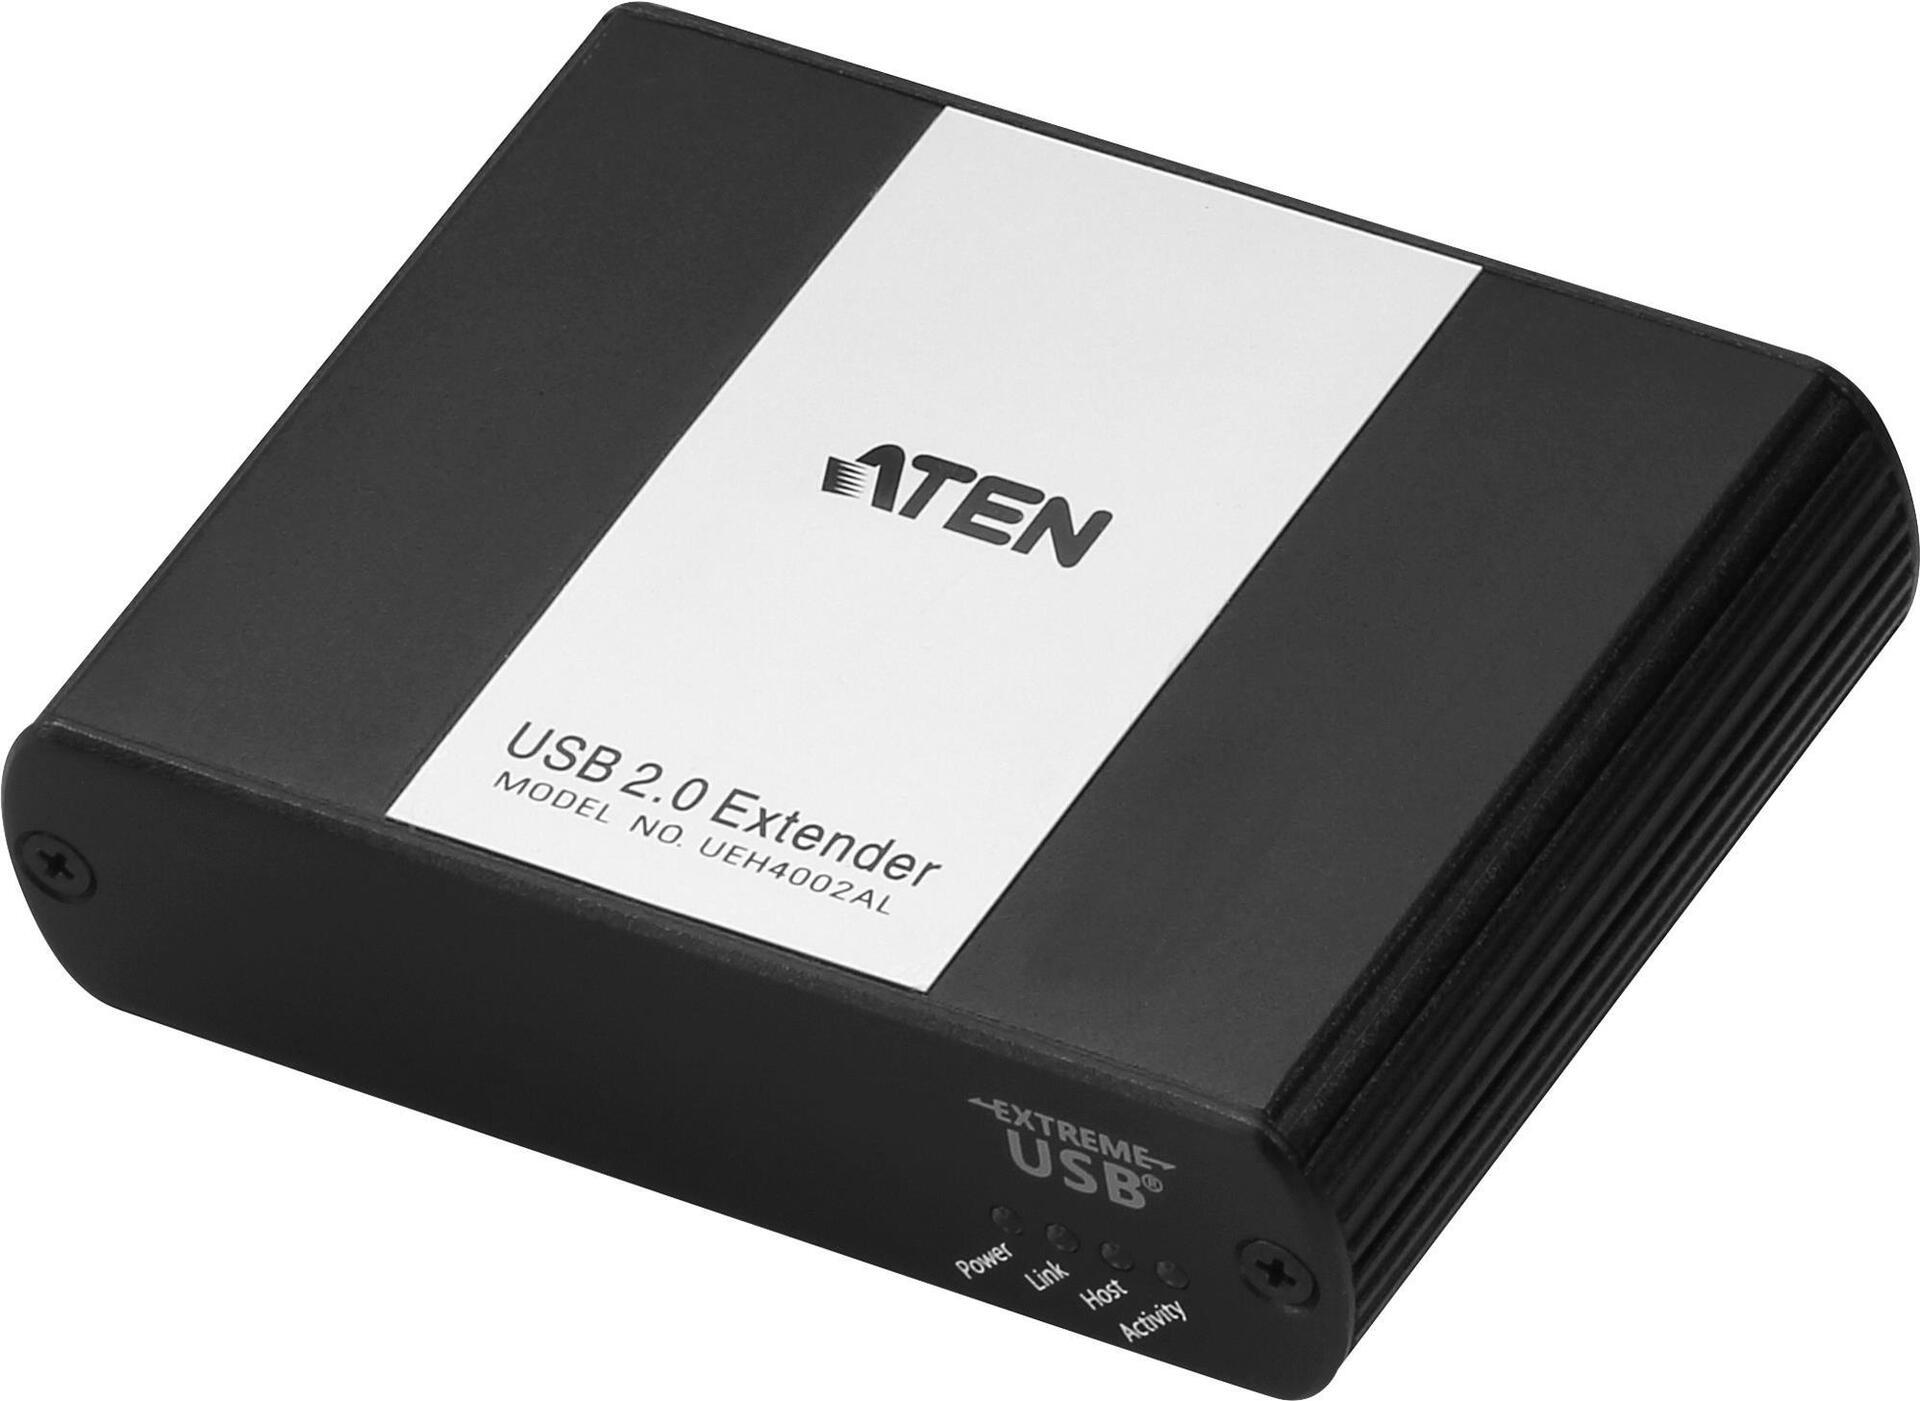 ATEN UEH4002A Local and Remote Units (UEH4002A-AT-G)